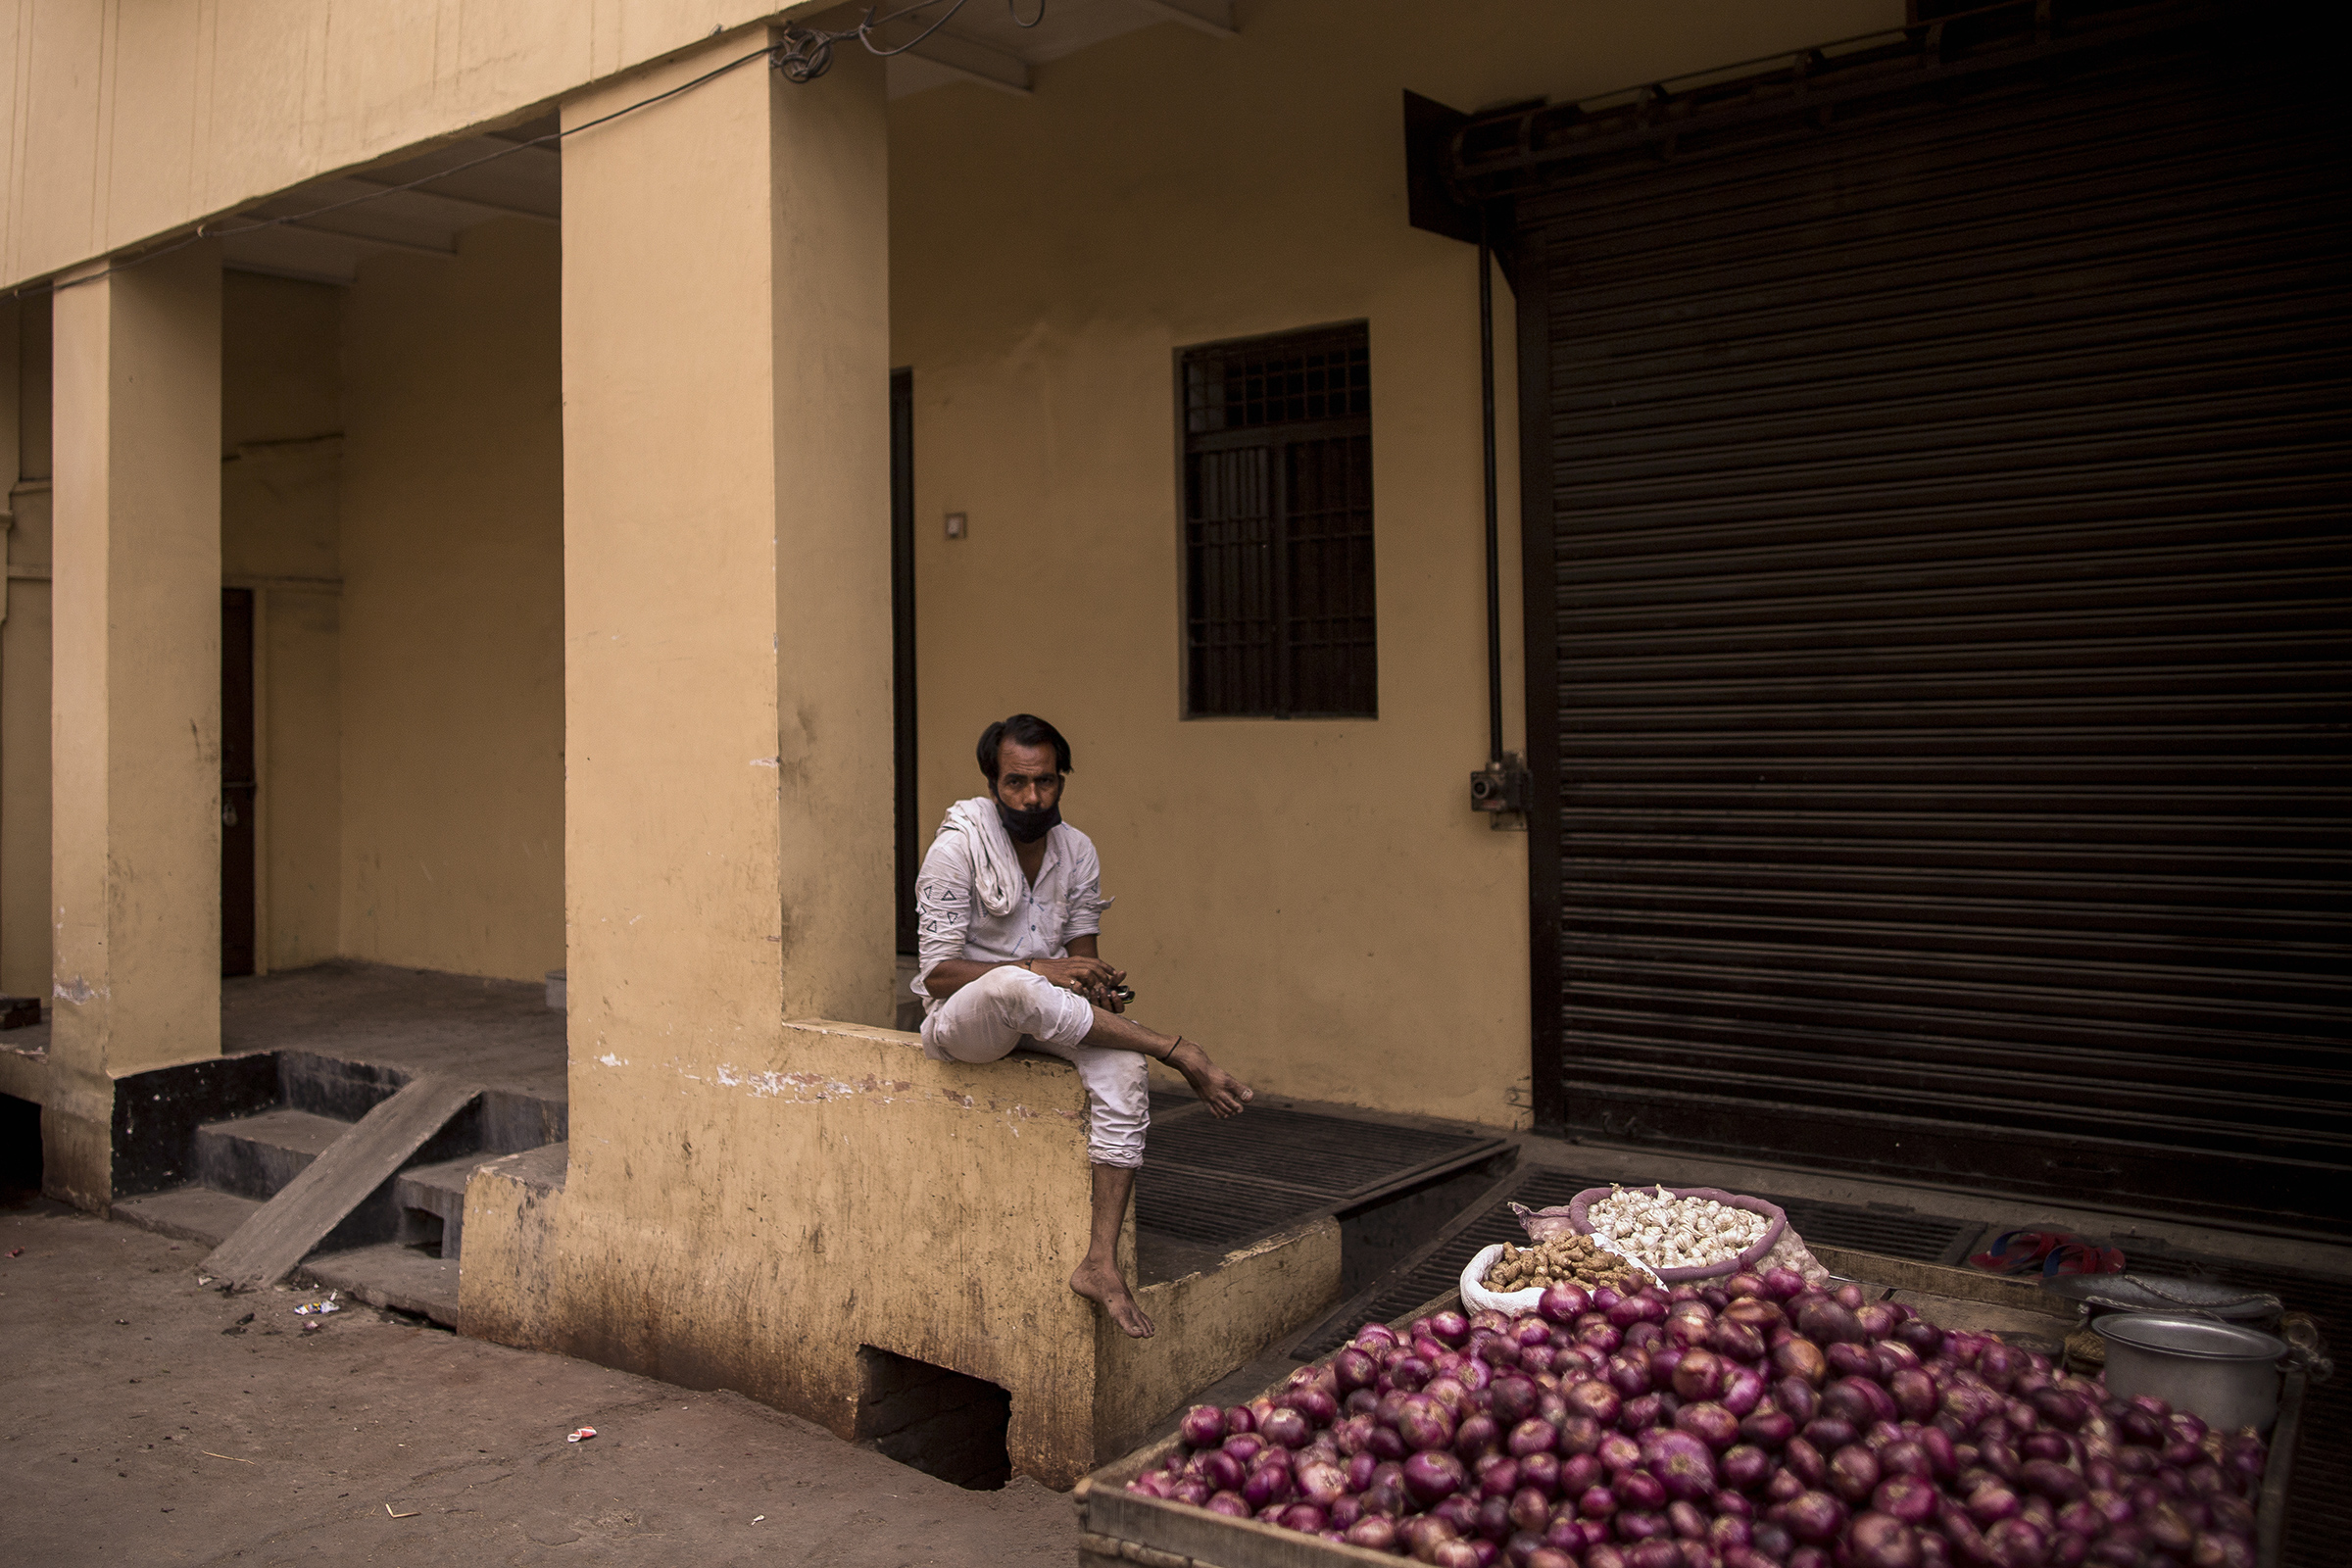 An onion vendor waits for customers on a deserted street during a lockdown in Agra, Uttar Pradesh, on May 3, 2021. (Anindito Mukherjee—Bloomberg/Getty Images)